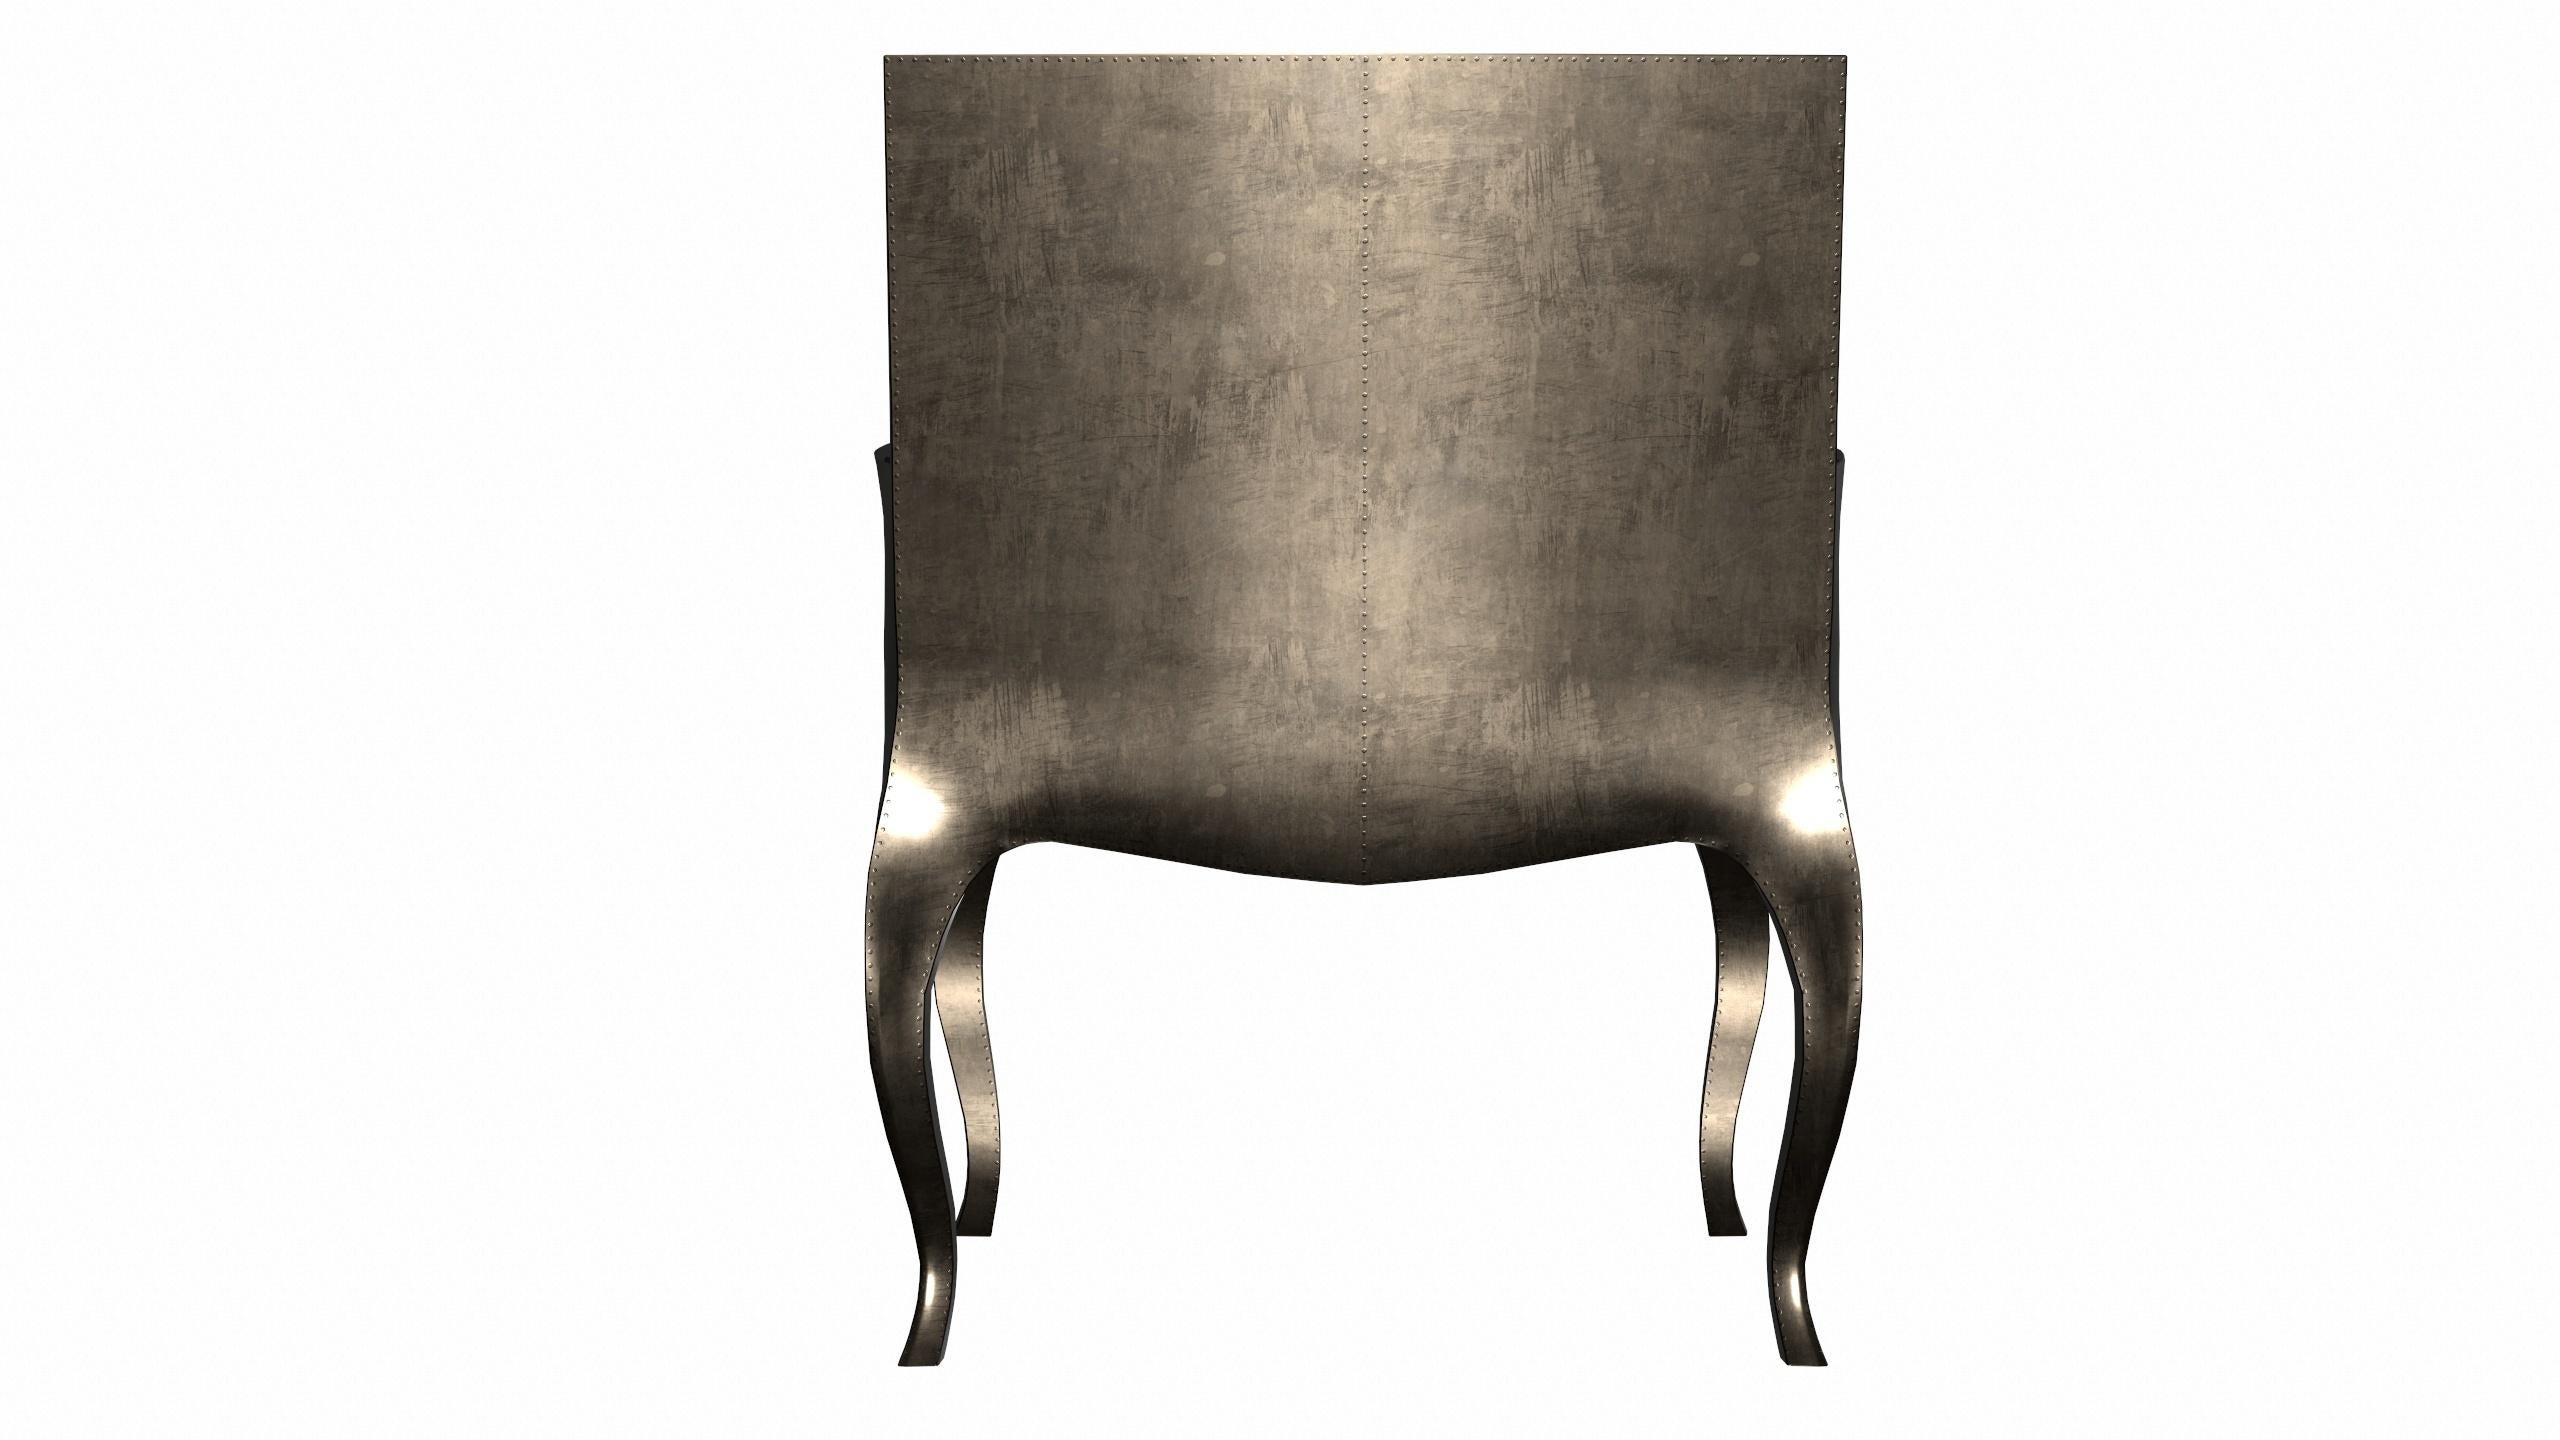 Hammered Art Nouveau Chairs in Smooth Antique Bronze by Paul Mathieu for S. Odegard For Sale